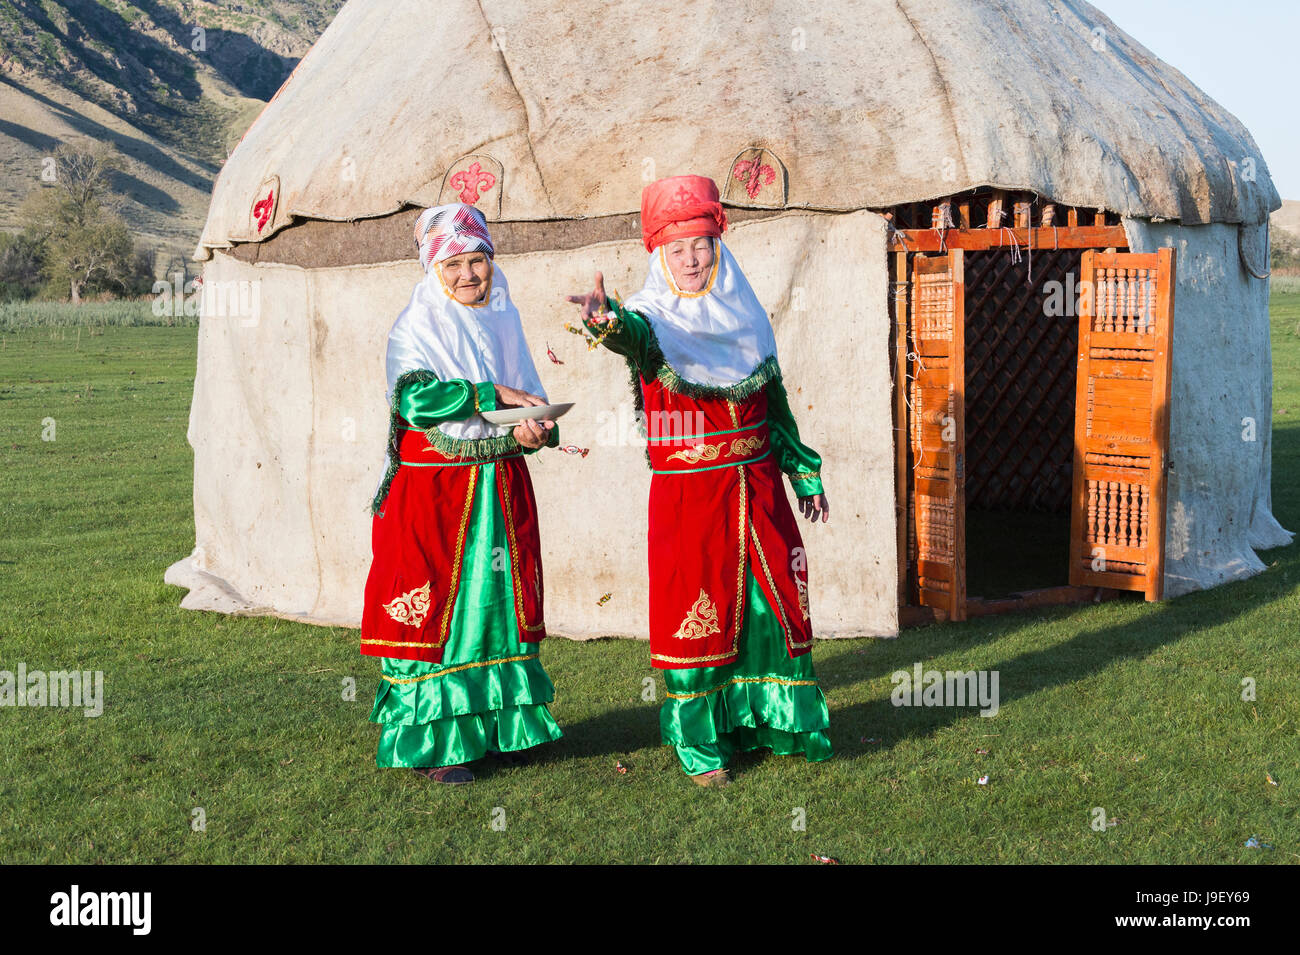 Two Kazakh women in traditional clothes in front of a yurt welcoming guests with candies, For editorial Use only, Sati village, Tien Shan Mountains, K Stock Photo